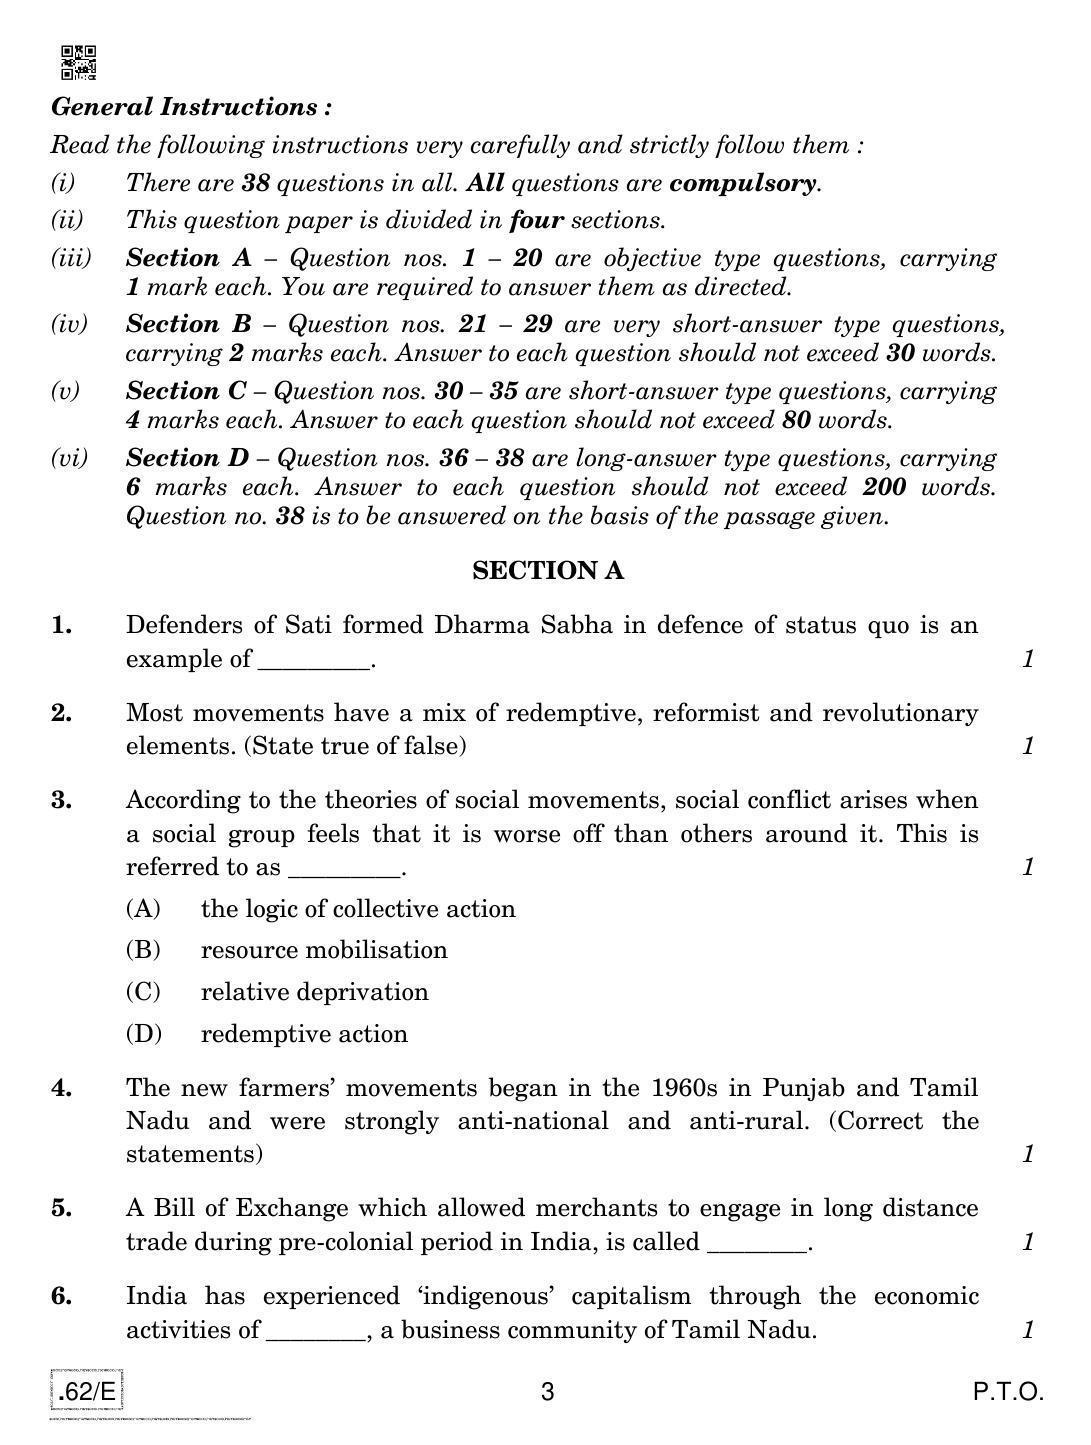 CBSE Class 12 Sociology 2020 Compartment Question Paper - Page 3